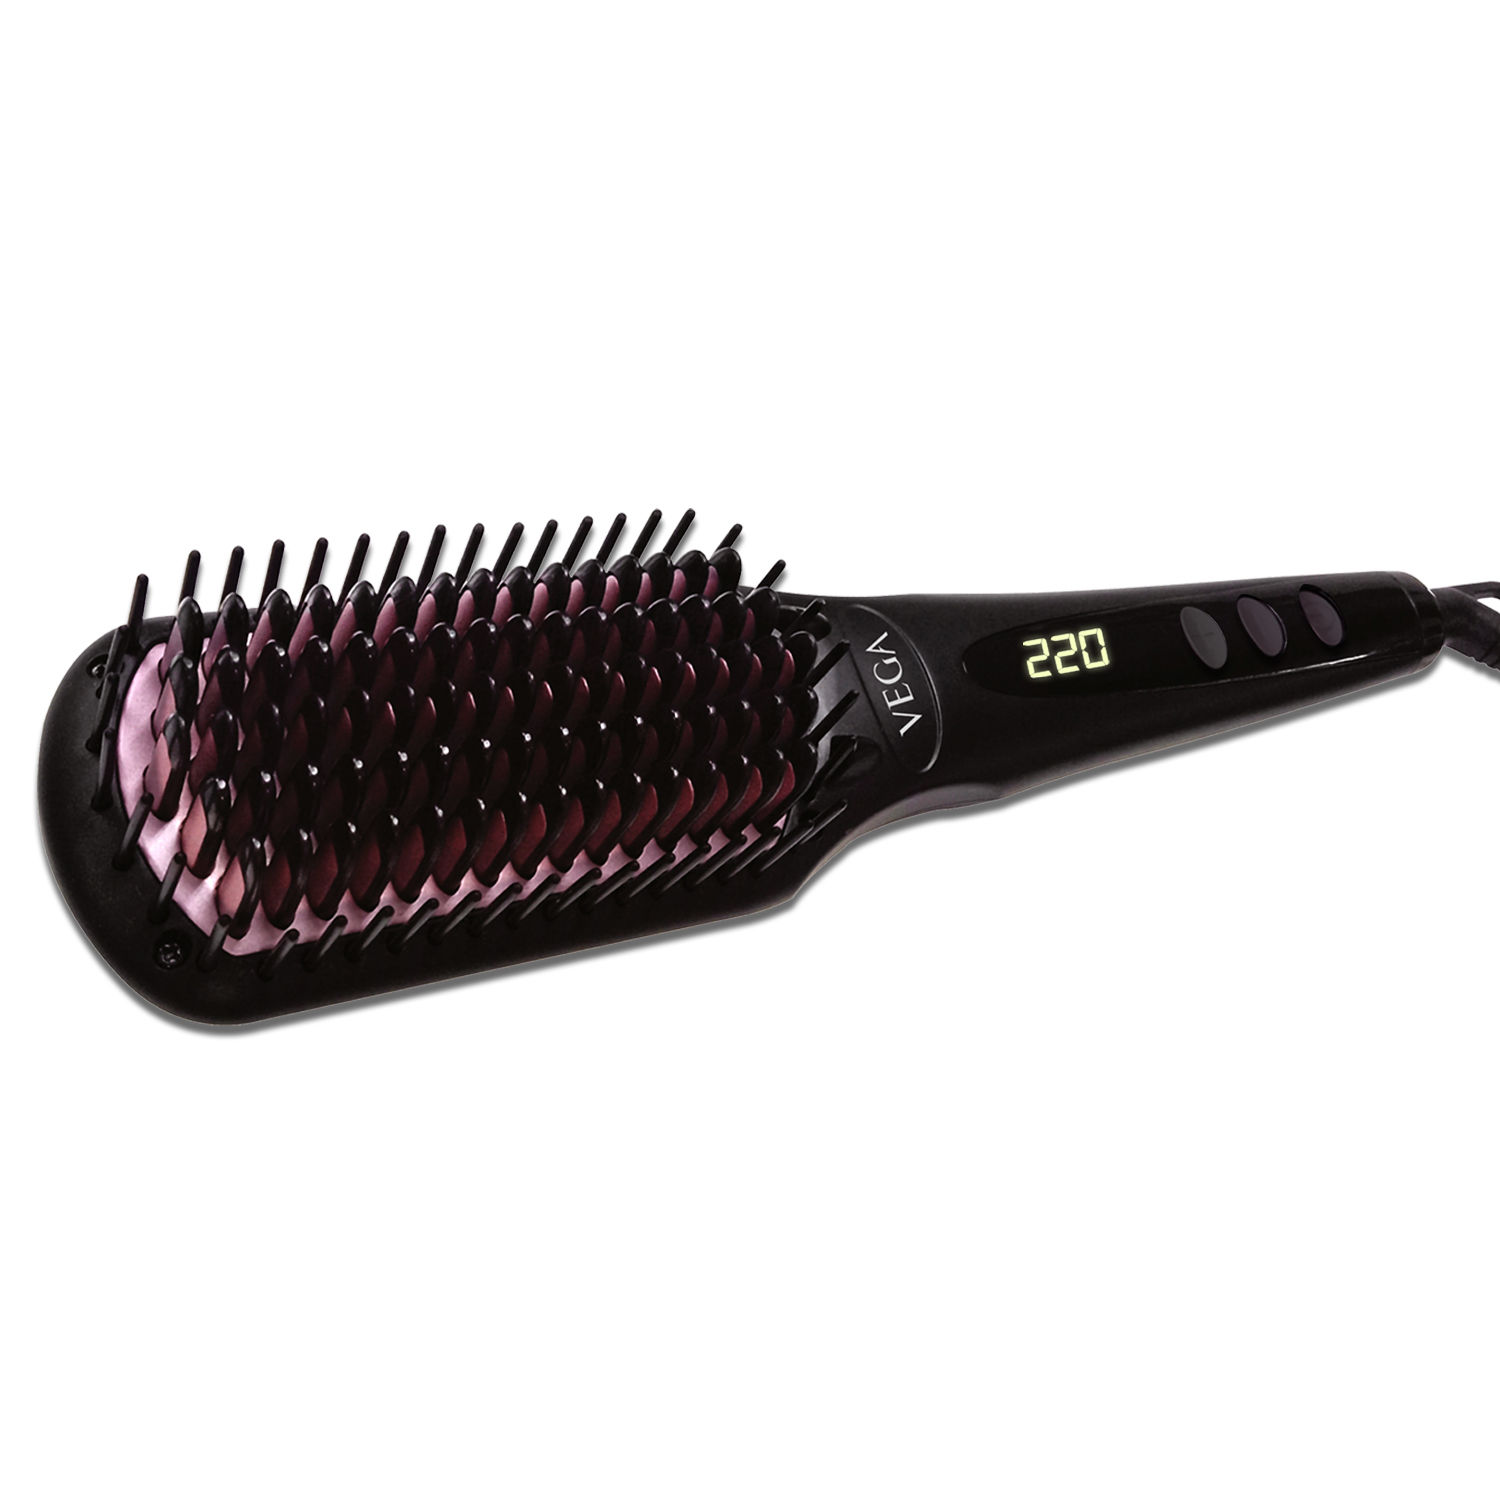 Compare Vega Hair Straightener Brush  Straightener for Women with Ceramic  Coated Plates 2 In 1 Hair Styler VHSSB01 Price in India  CompareNow